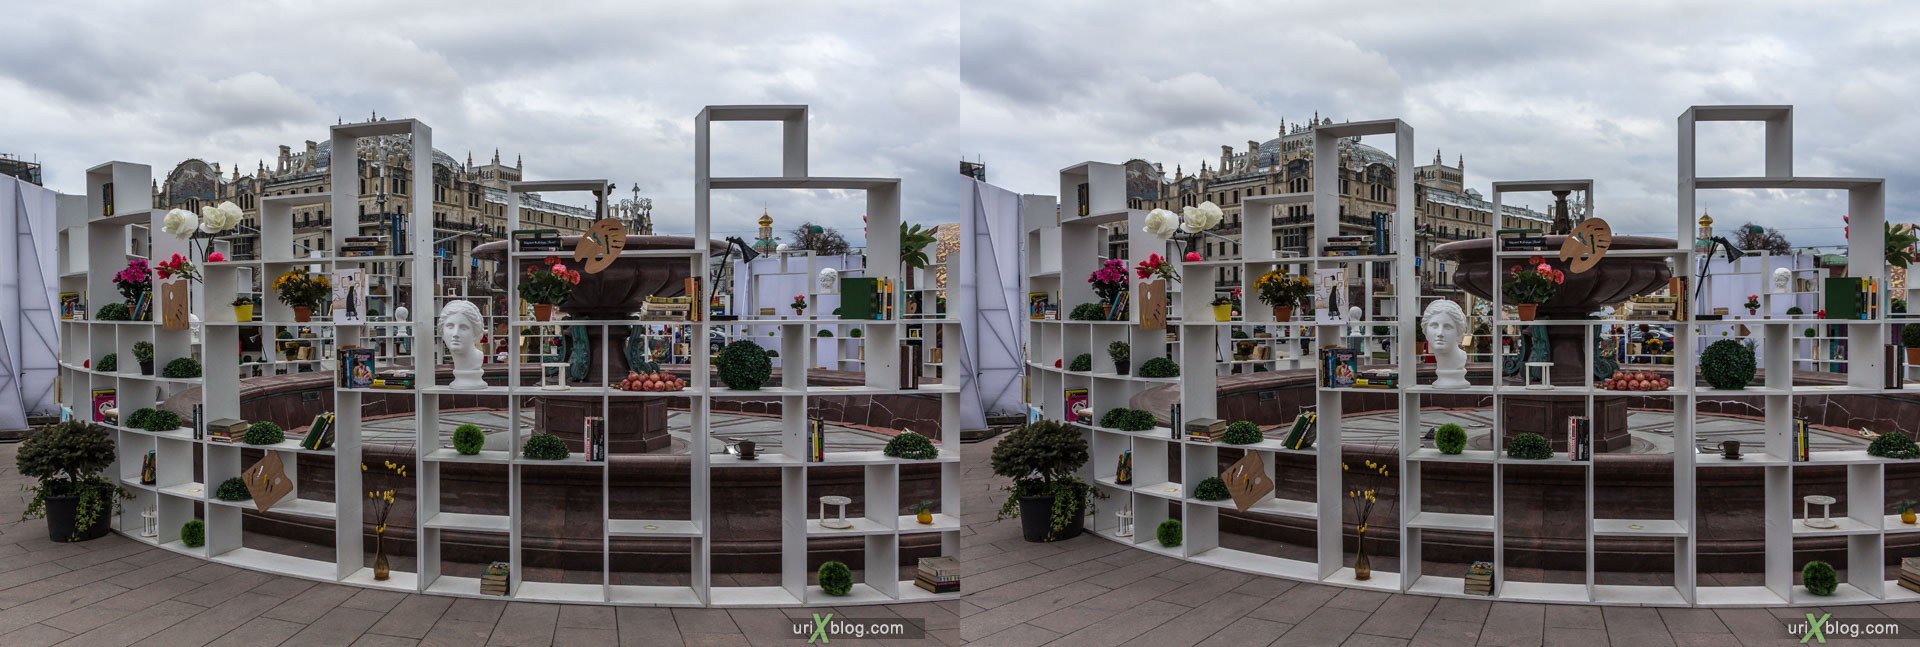 Theatre square, Moscow, Russia, 3D, stereo pair, cross-eyed, crossview, cross view stereo pair, stereoscopic, 2015